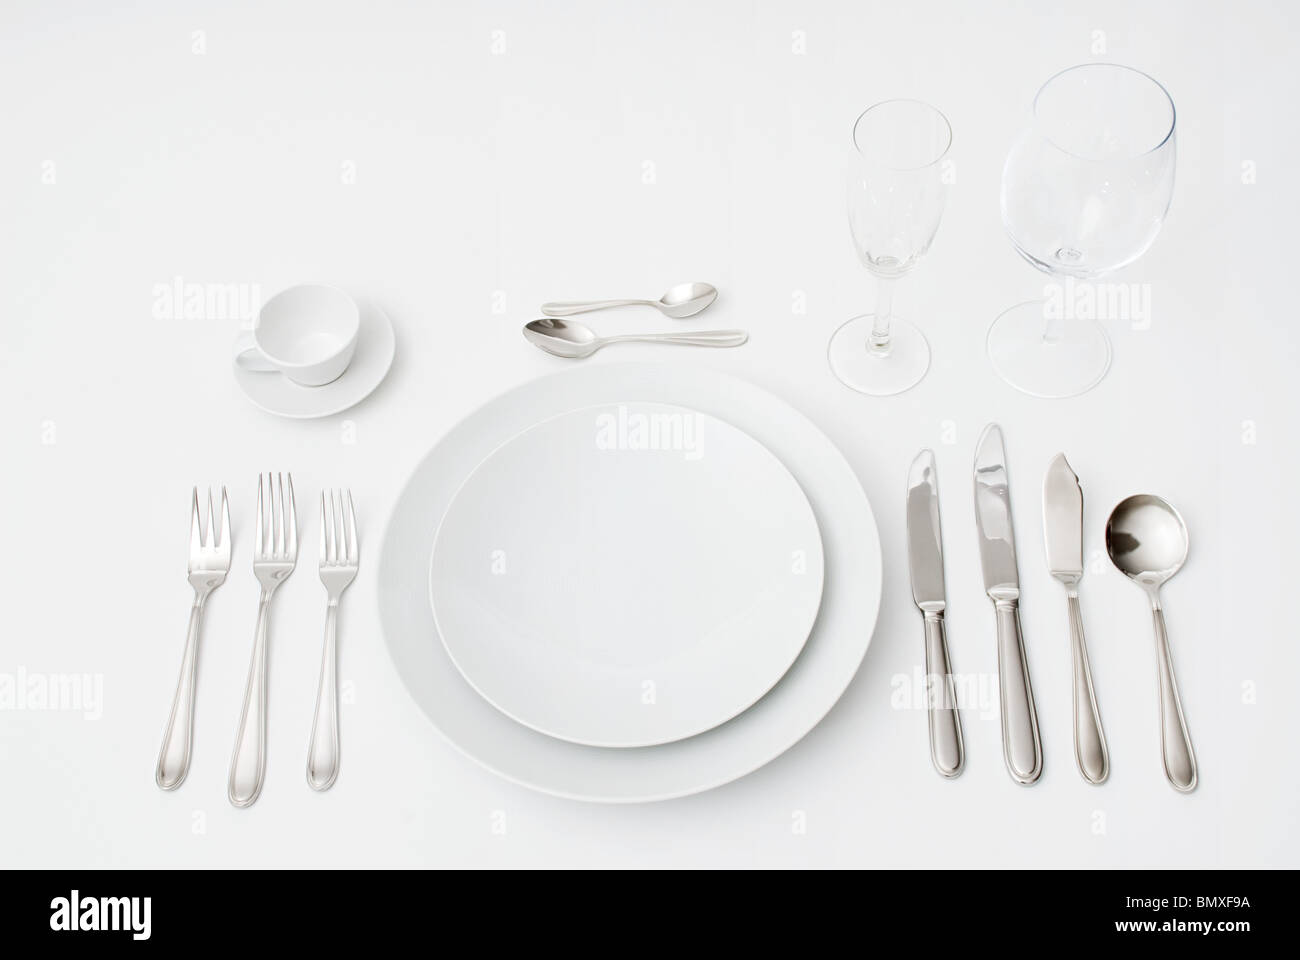 Formal place setting Stock Photo